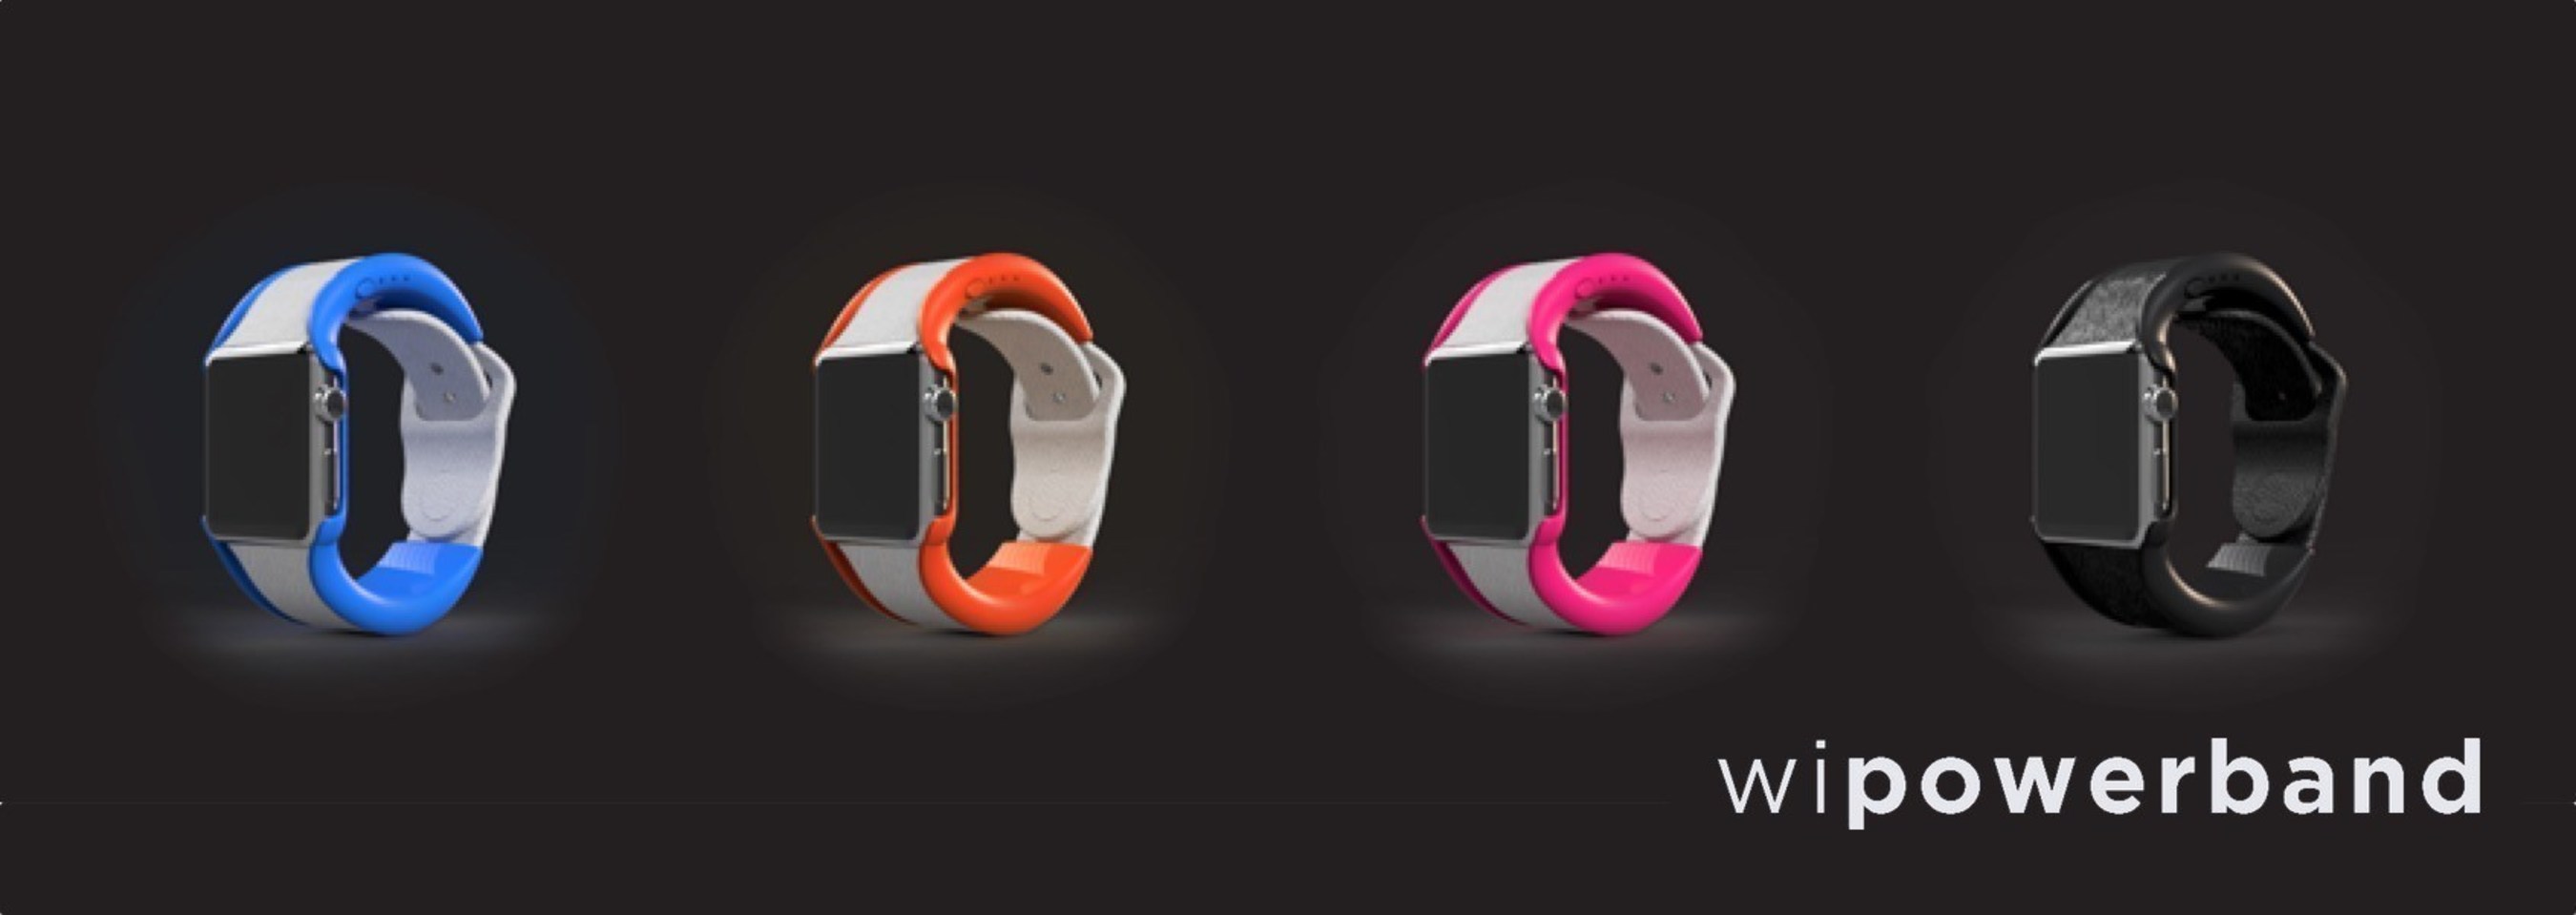 wiPowerBand.com introduces the first wearable battery extender for the Apple Watch. A compact battery and wireless power transmitter is embedded in a sleek molded unit that fits under the Apple Watch, providing extended battery life and protection.